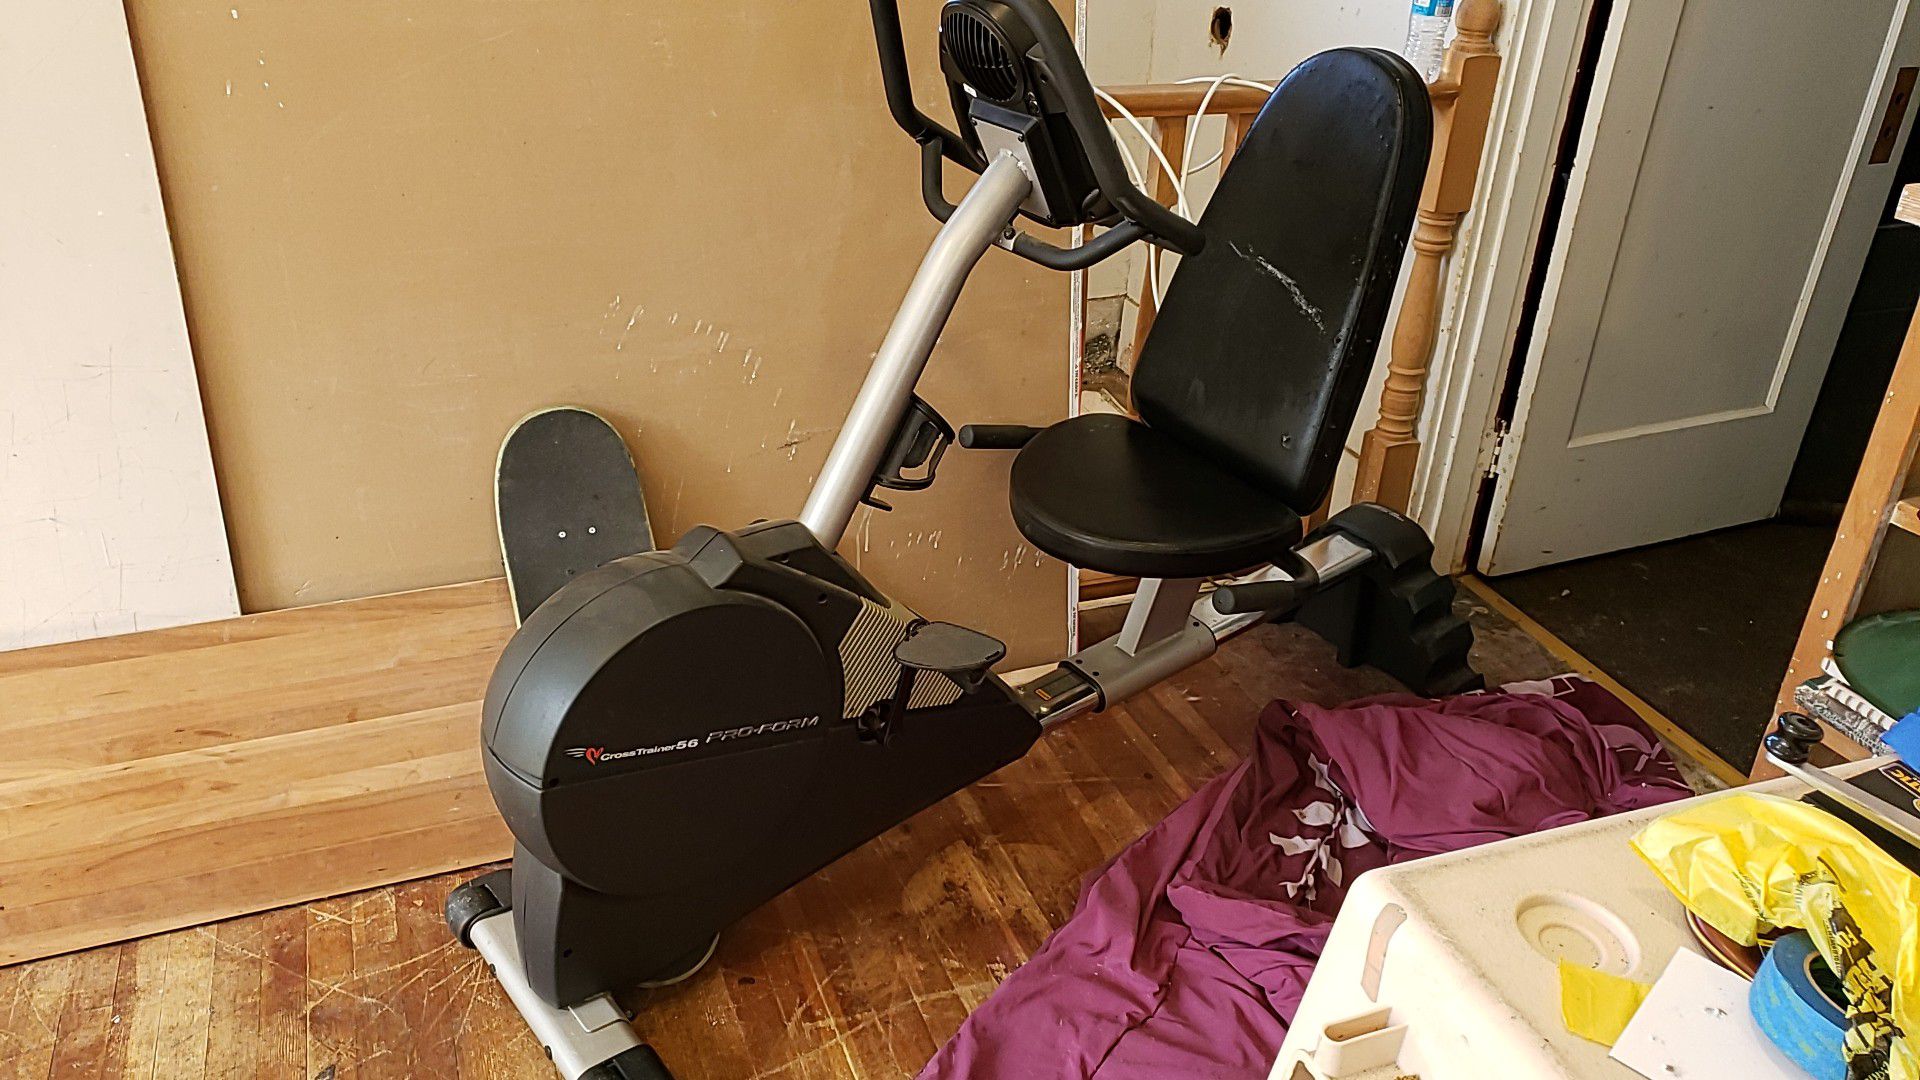 Proform cross trainer 56 exercise bike sit down style